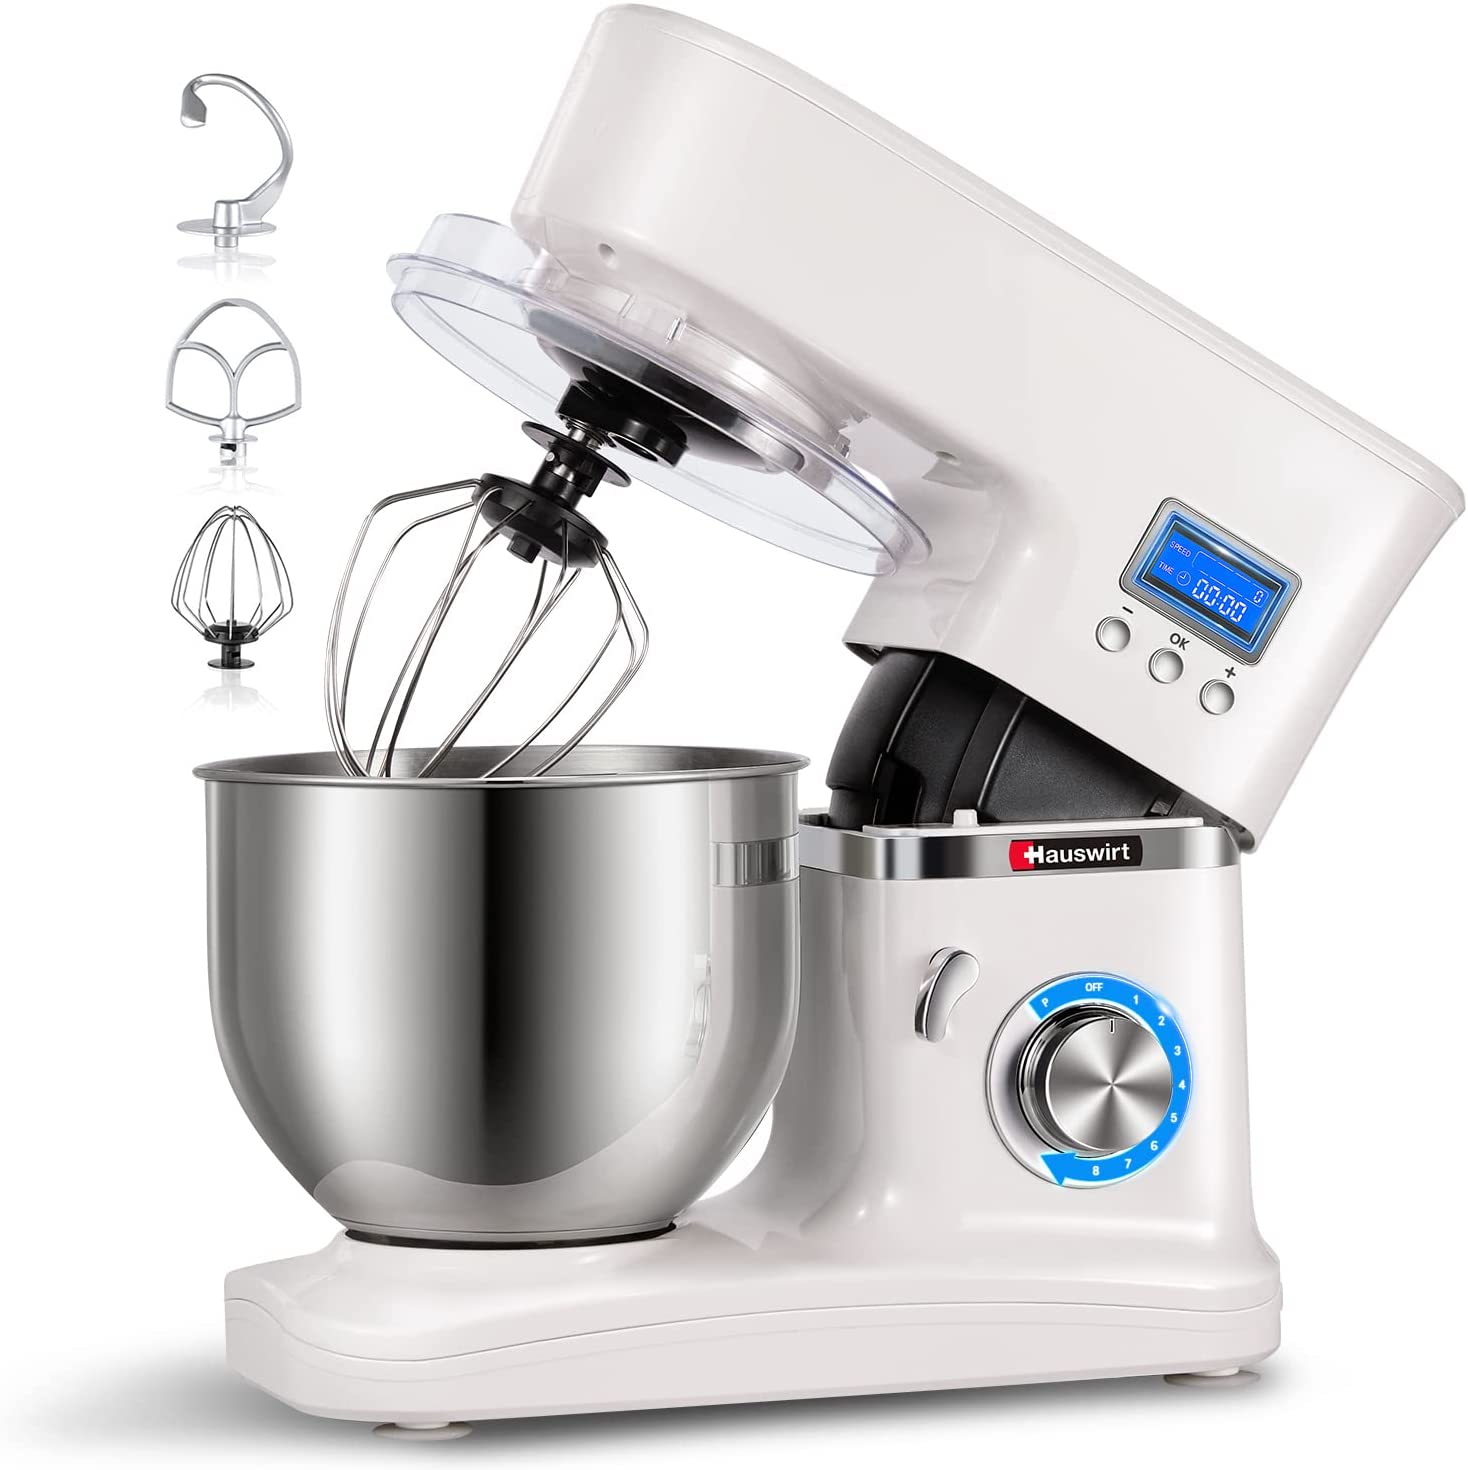 Hauswirt Multifunctional Food Processor, Electric Kitchen Mixer, and Kneading Machine with 5 Litre Stainless Steel Mixing Bowl, 8 Speeds, 1000W, Whisk, Dough Hook, and LCD Screen